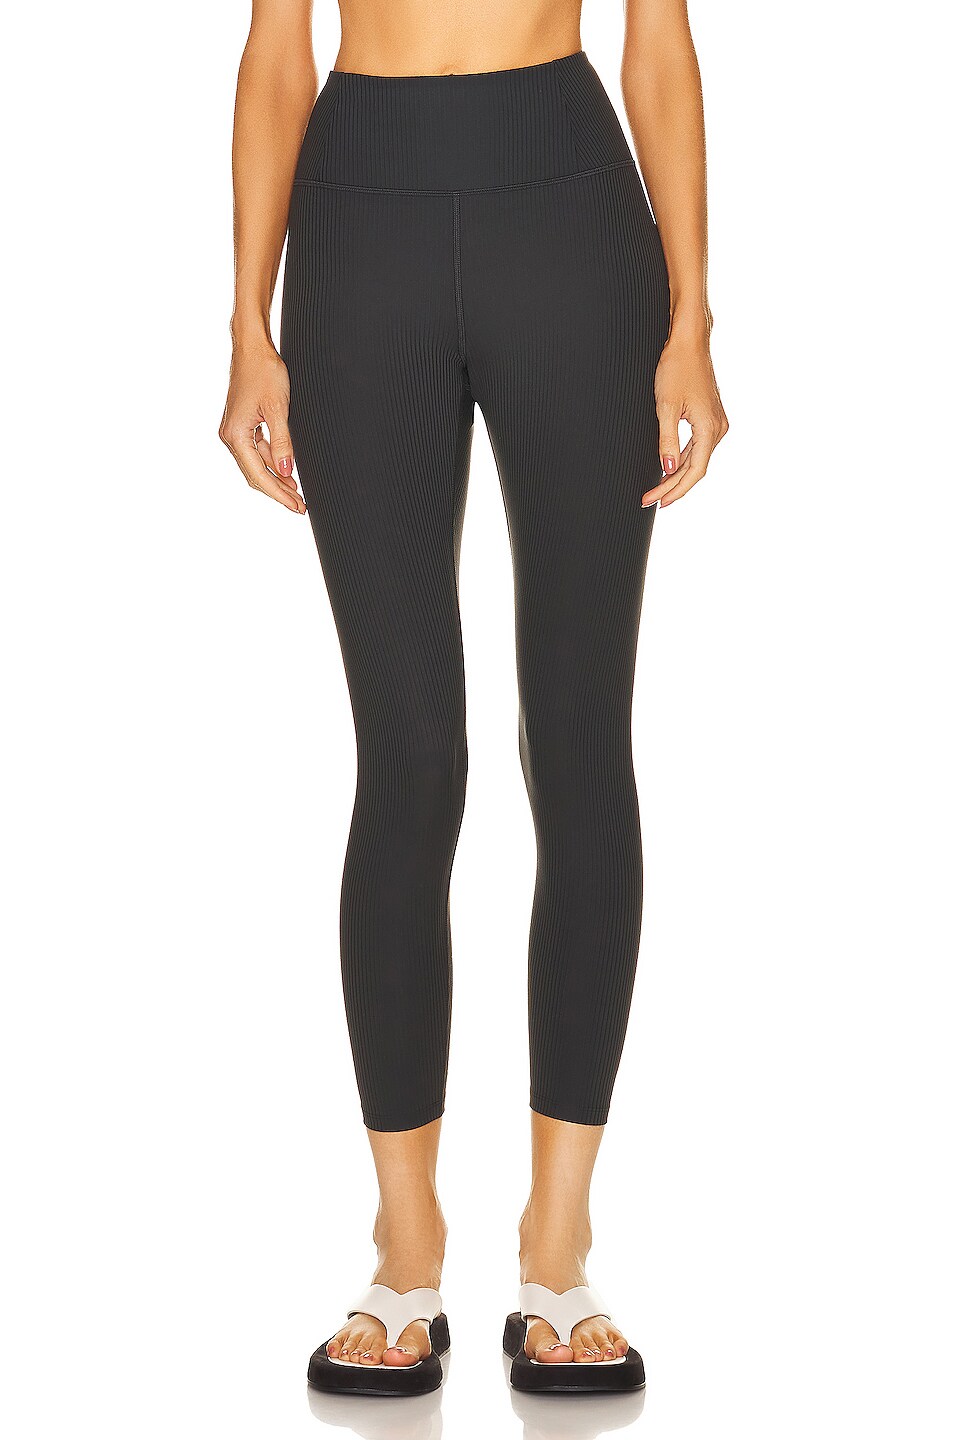 Image 1 of Girlfriend Collective Rib High-Rise Legging in Black